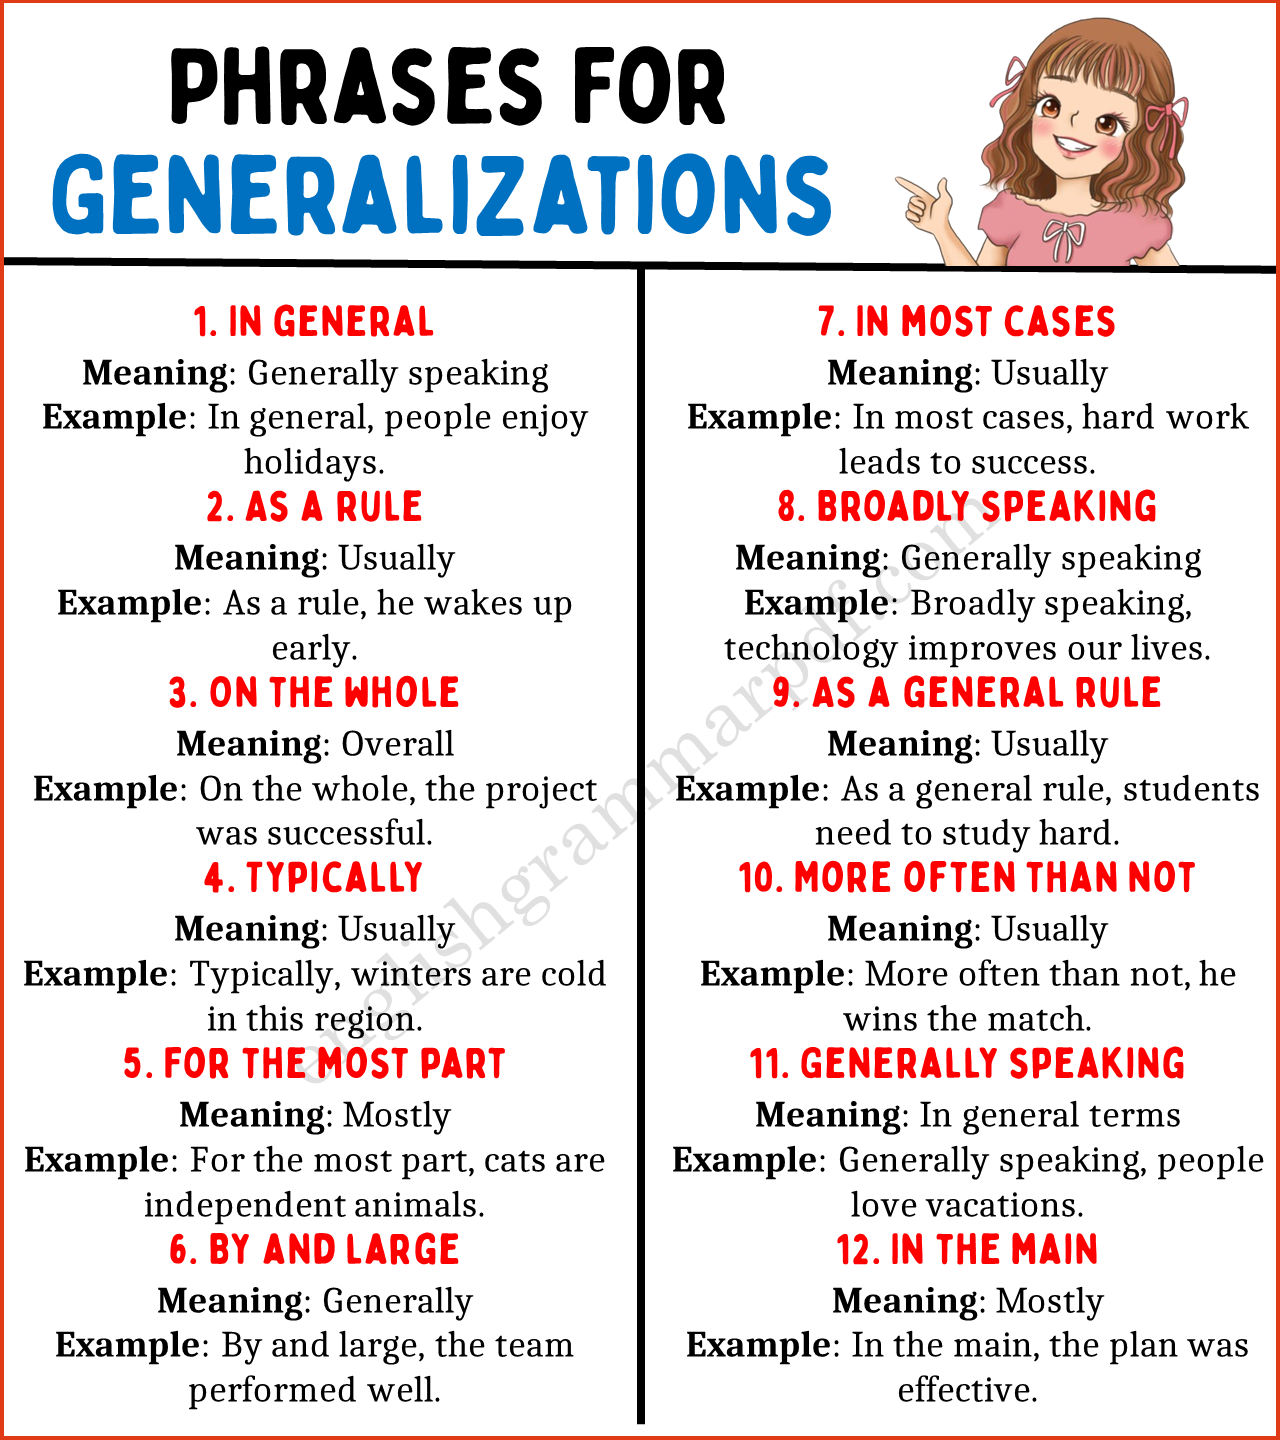 Phrases for Generalizations